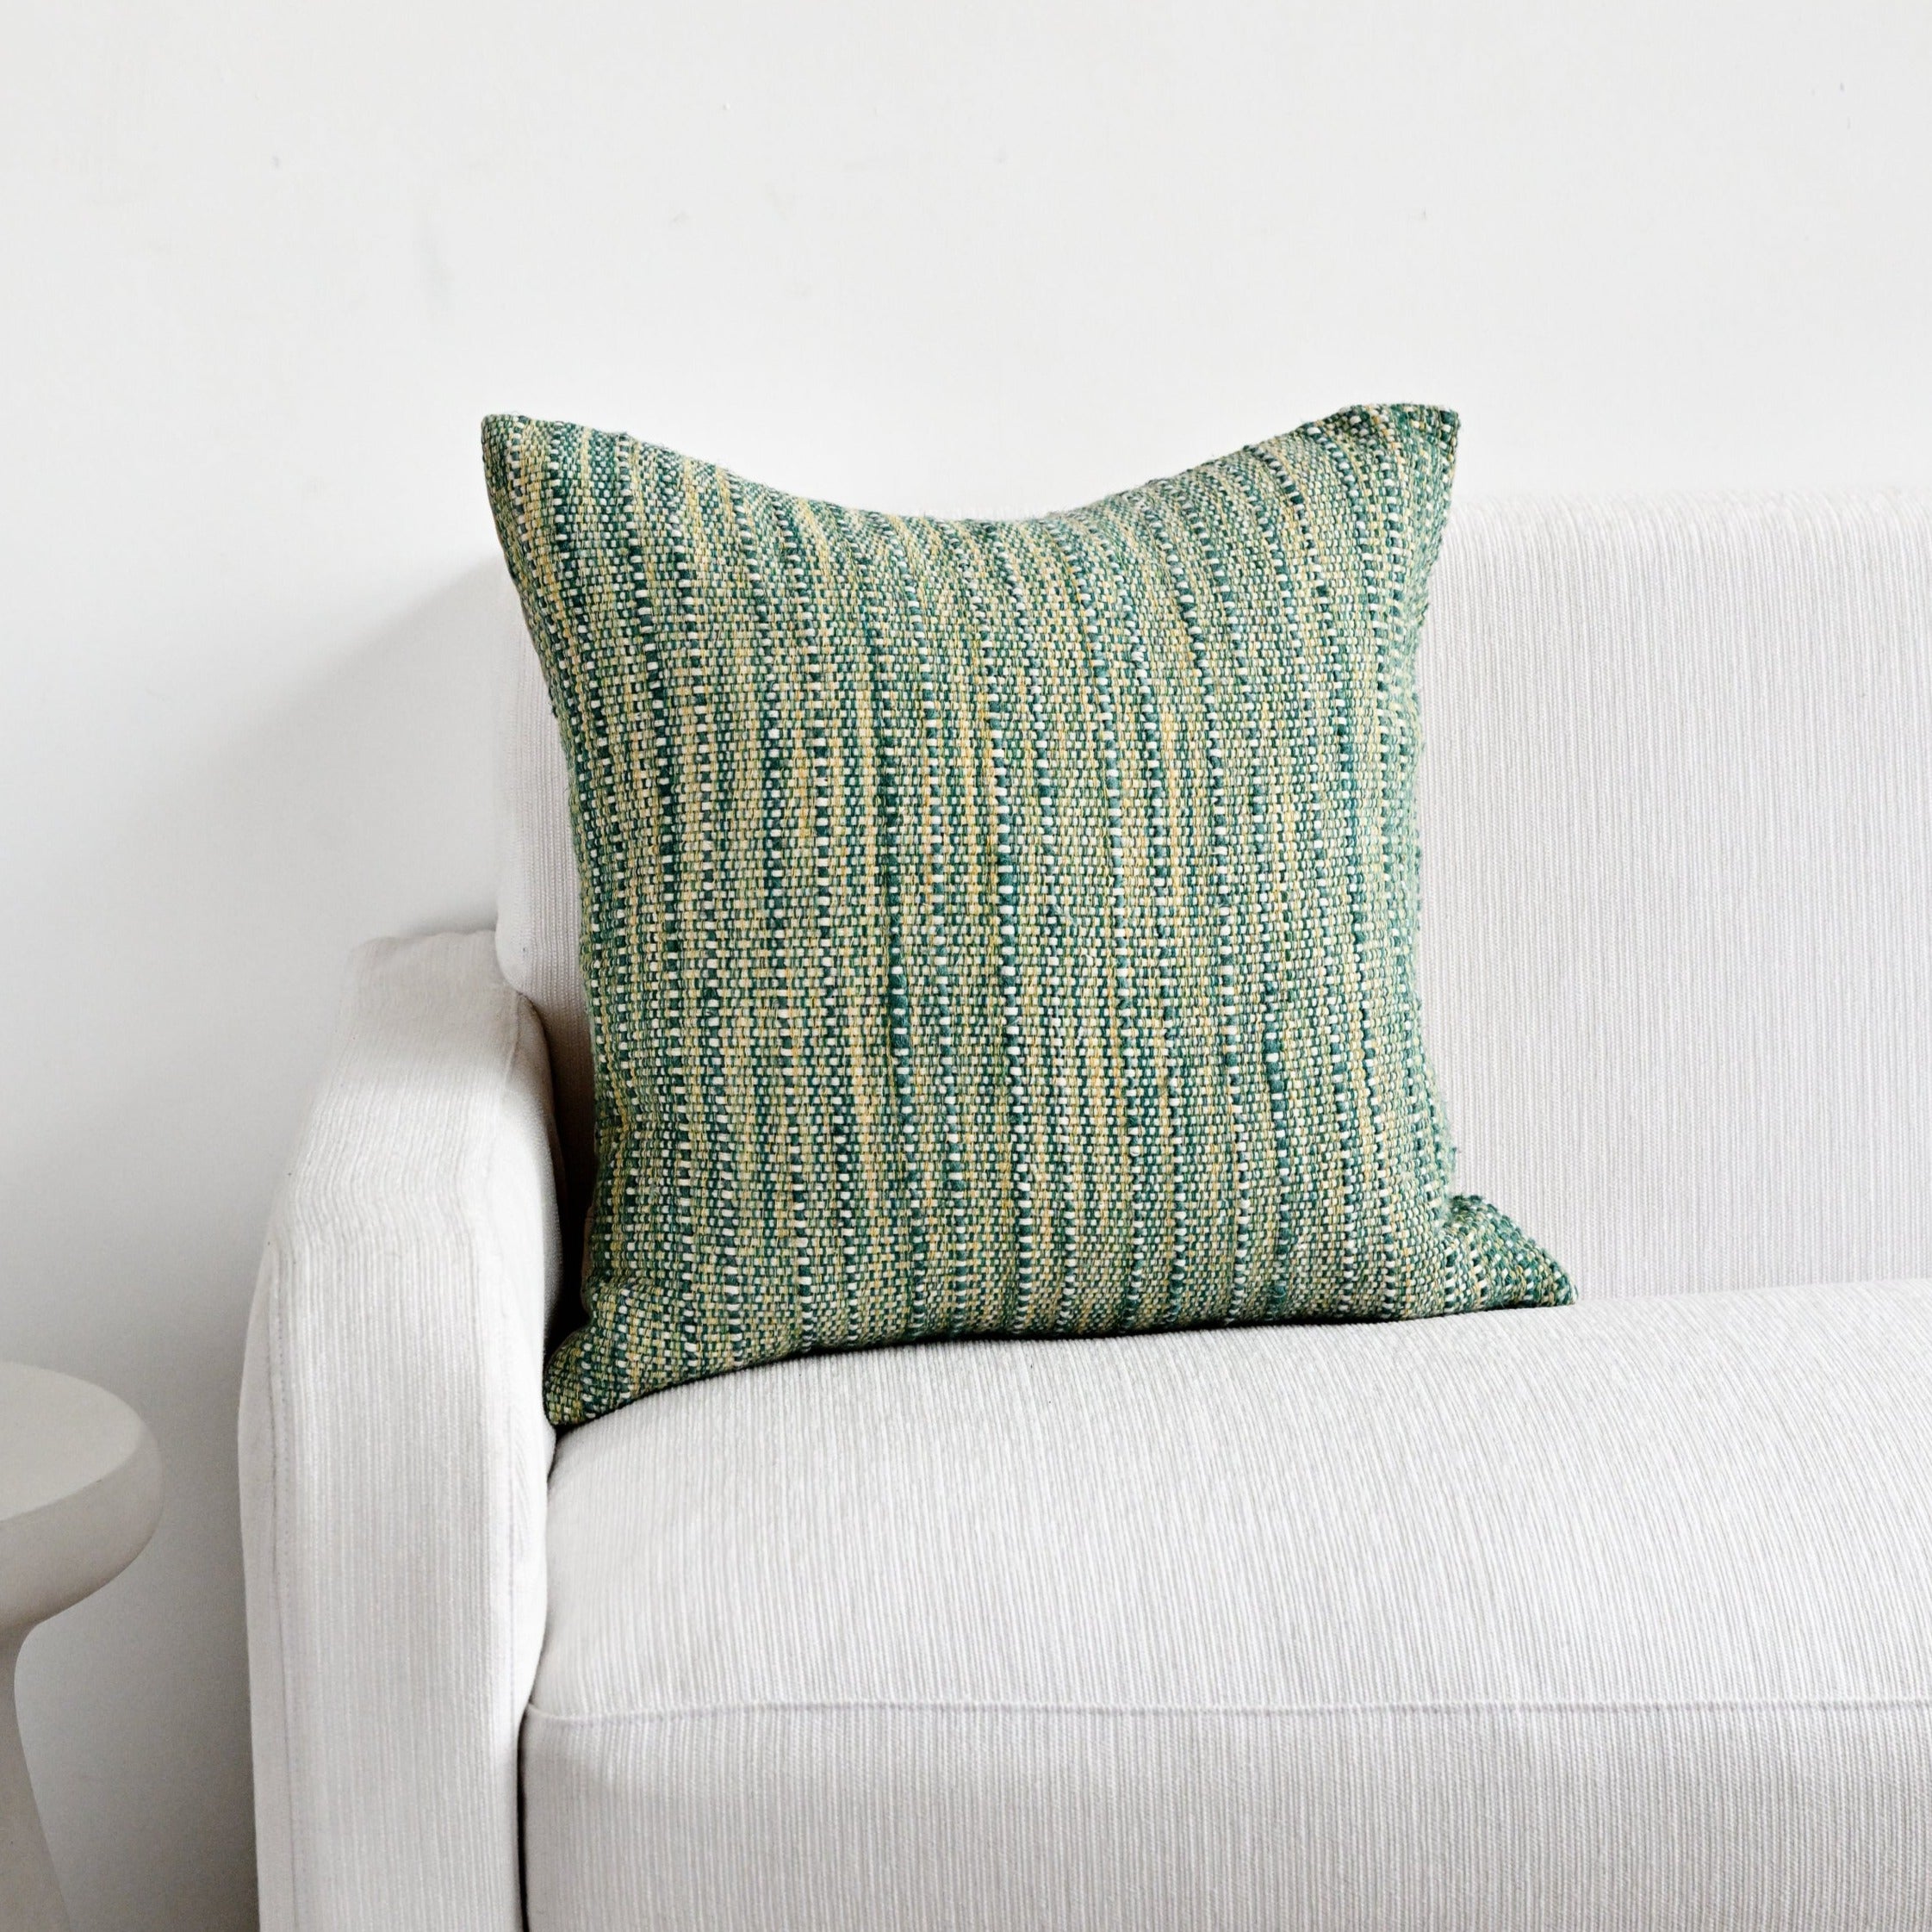 Kasuri Stripe Decorative Throw Pillow in Blue and Green - Chloe & Olive